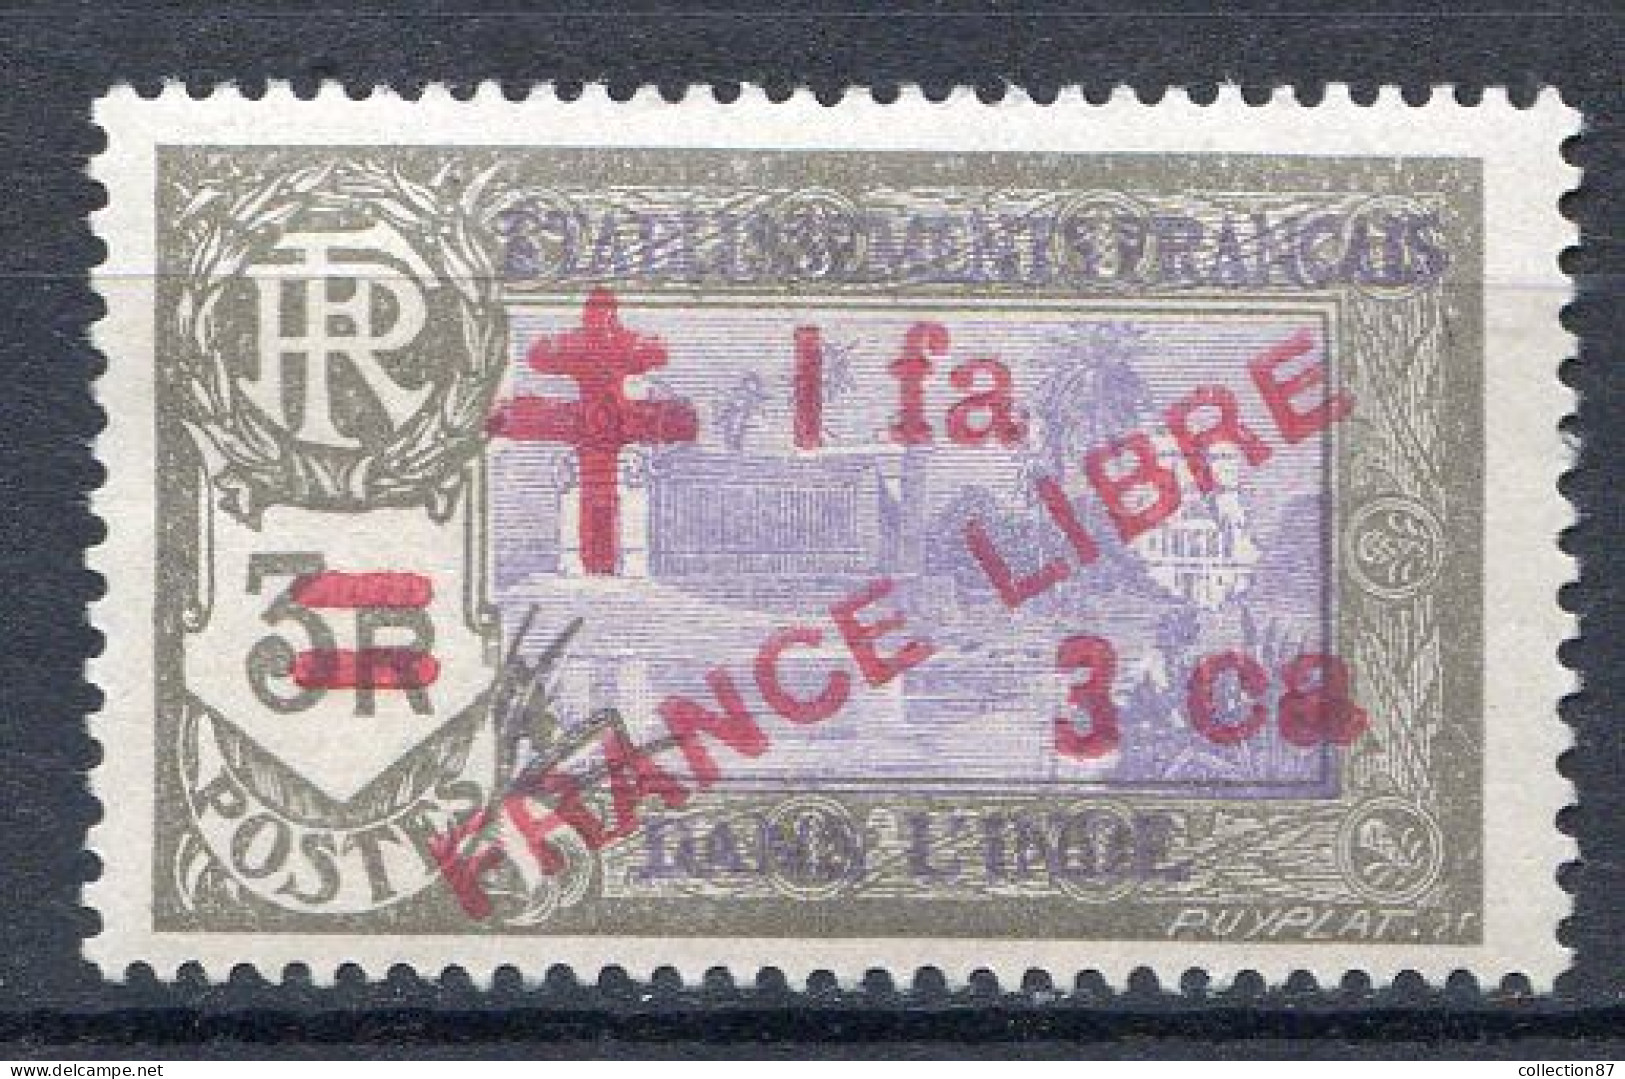 Réf 75 CL2 < -- INDE - FRANCE LIBRE < N° 211 * NEUF Ch.Dos Visible MH * - Ungebraucht